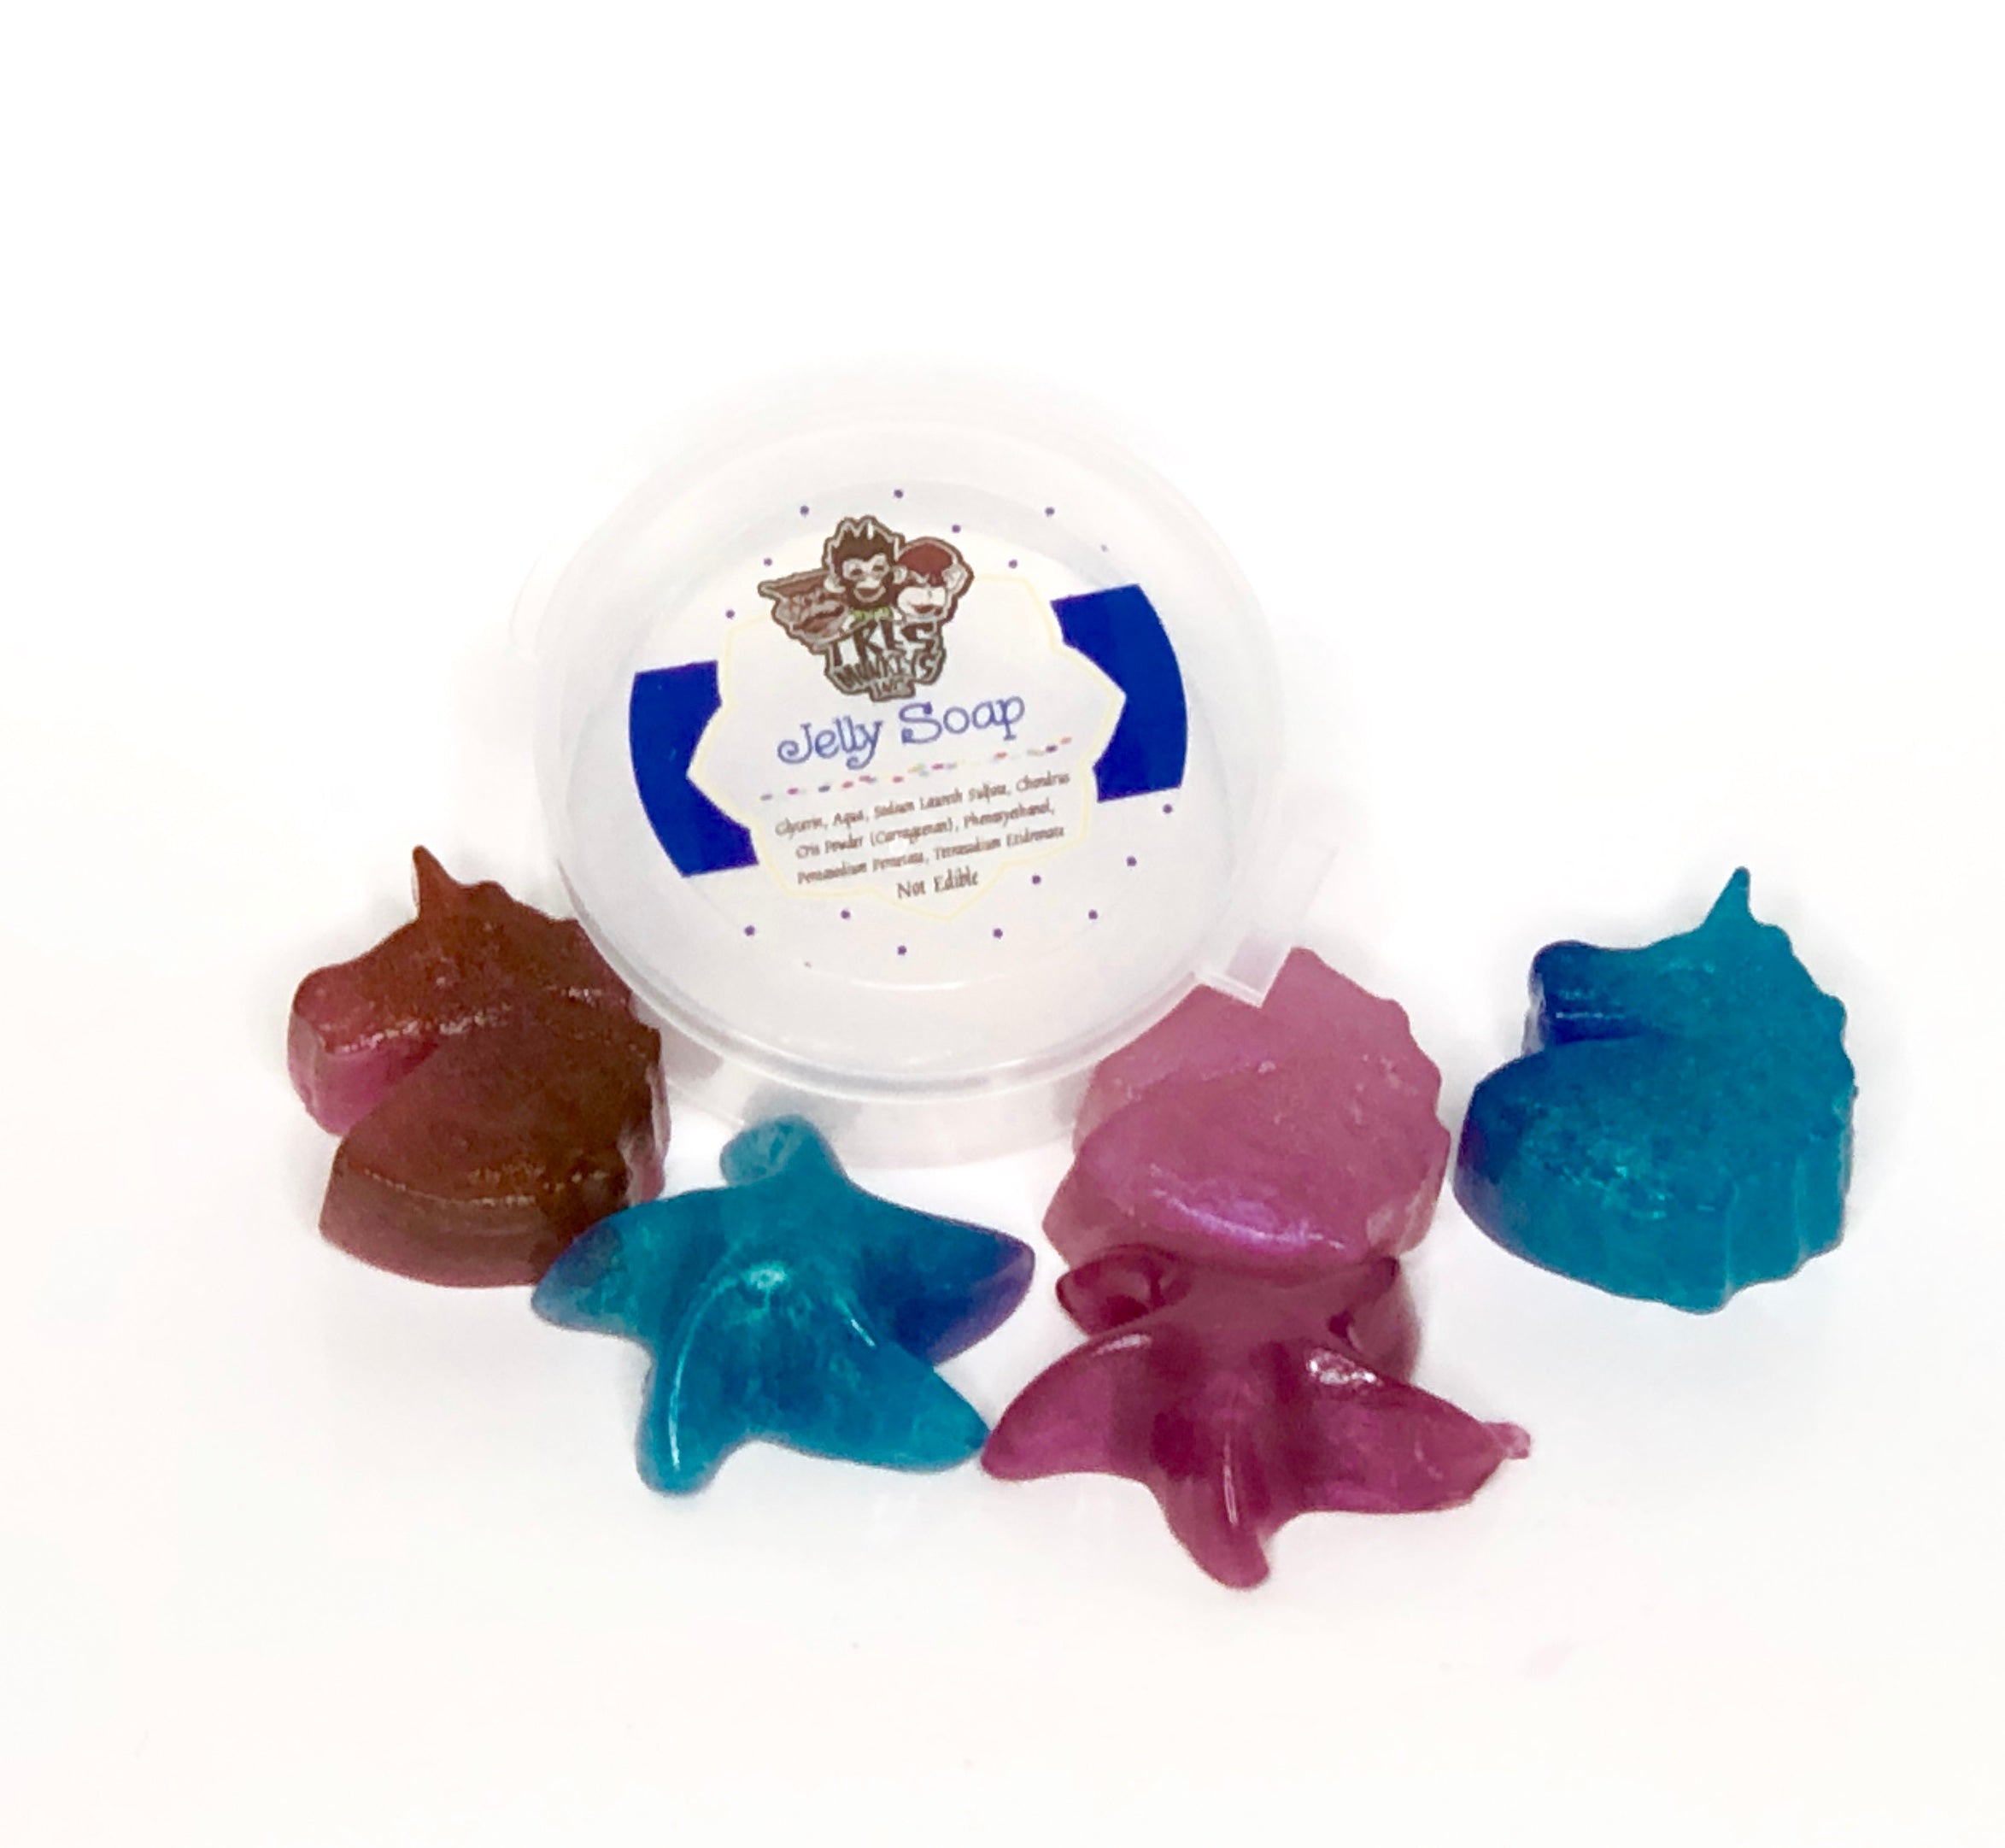 3 little pigs - 3 piece jelly soap set – Gilaas Soap